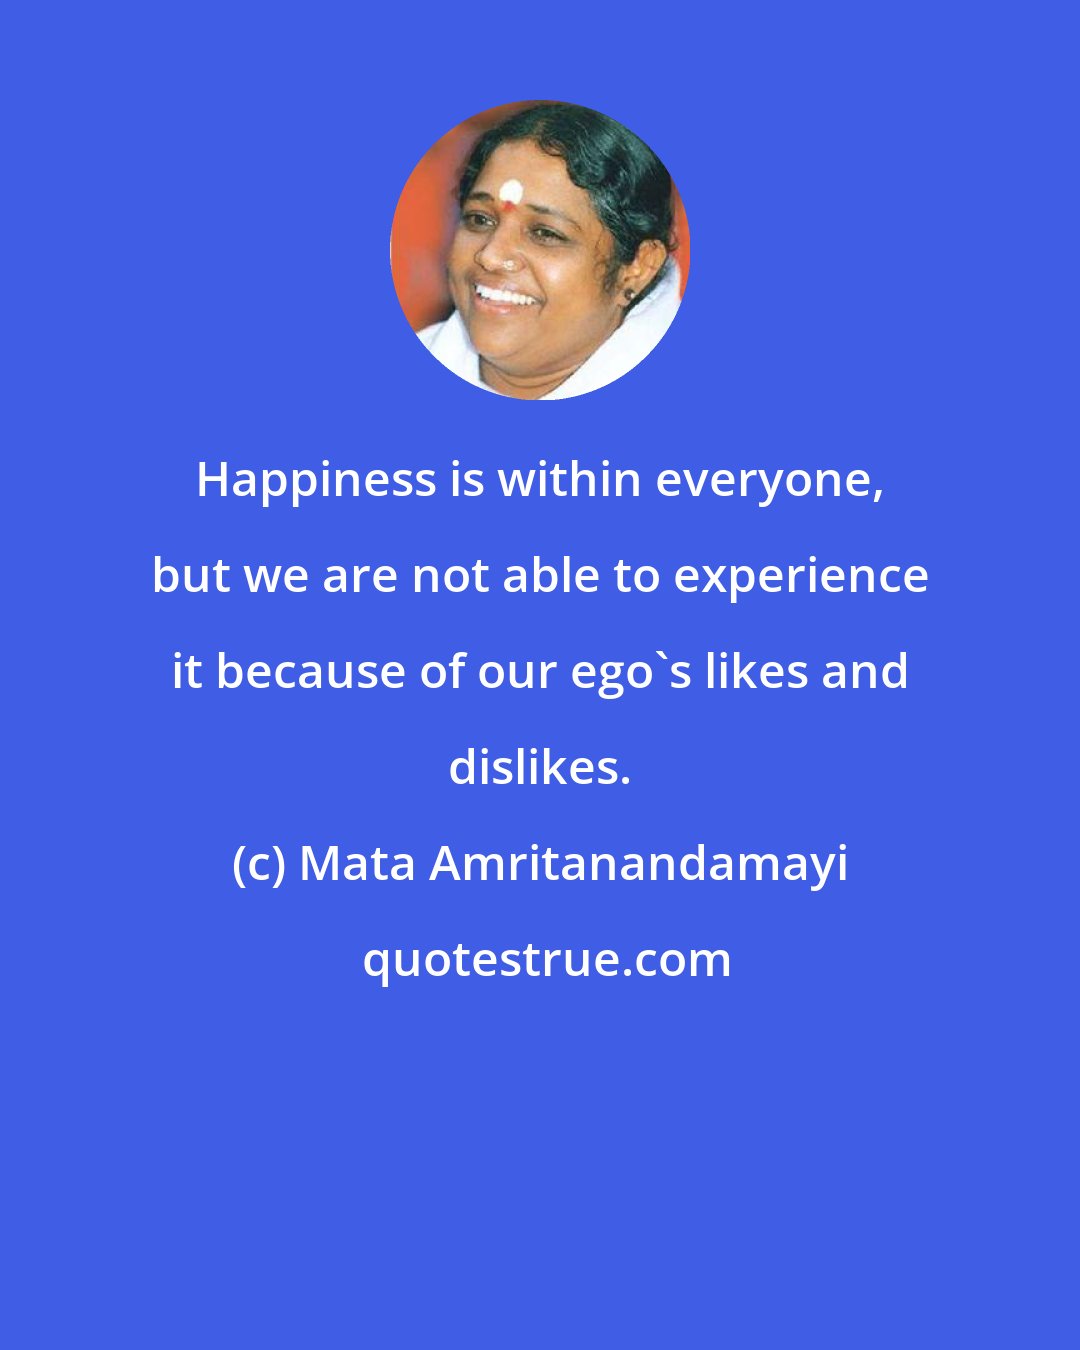 Mata Amritanandamayi: Happiness is within everyone, but we are not able to experience it because of our ego's likes and dislikes.